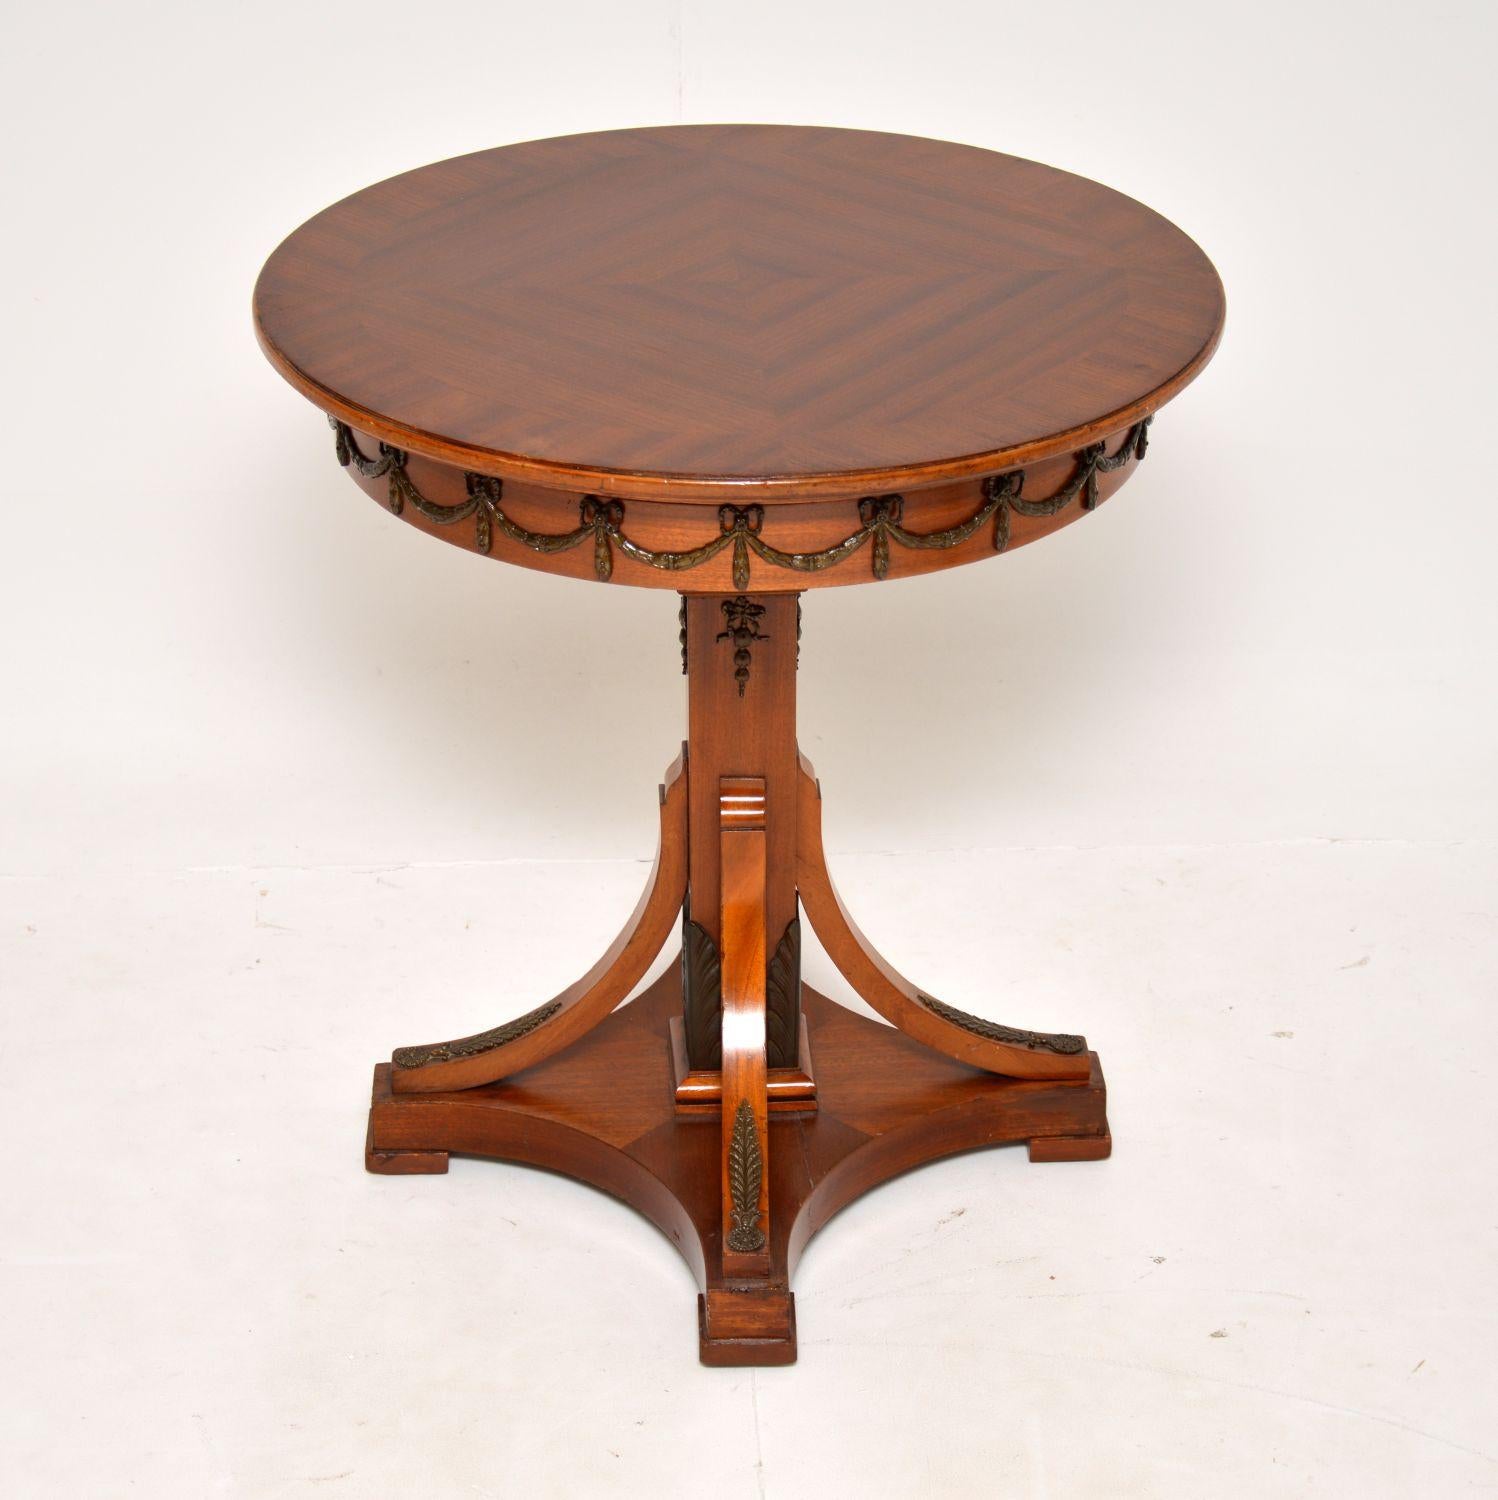 A stunning antique Swedish occasional table. This is in the Biedermeier Empire style, with Neoclassical features, it dates from around the 1890-1910 period.

The quality is fantastic, this is very well made with fine quality bronze mounts